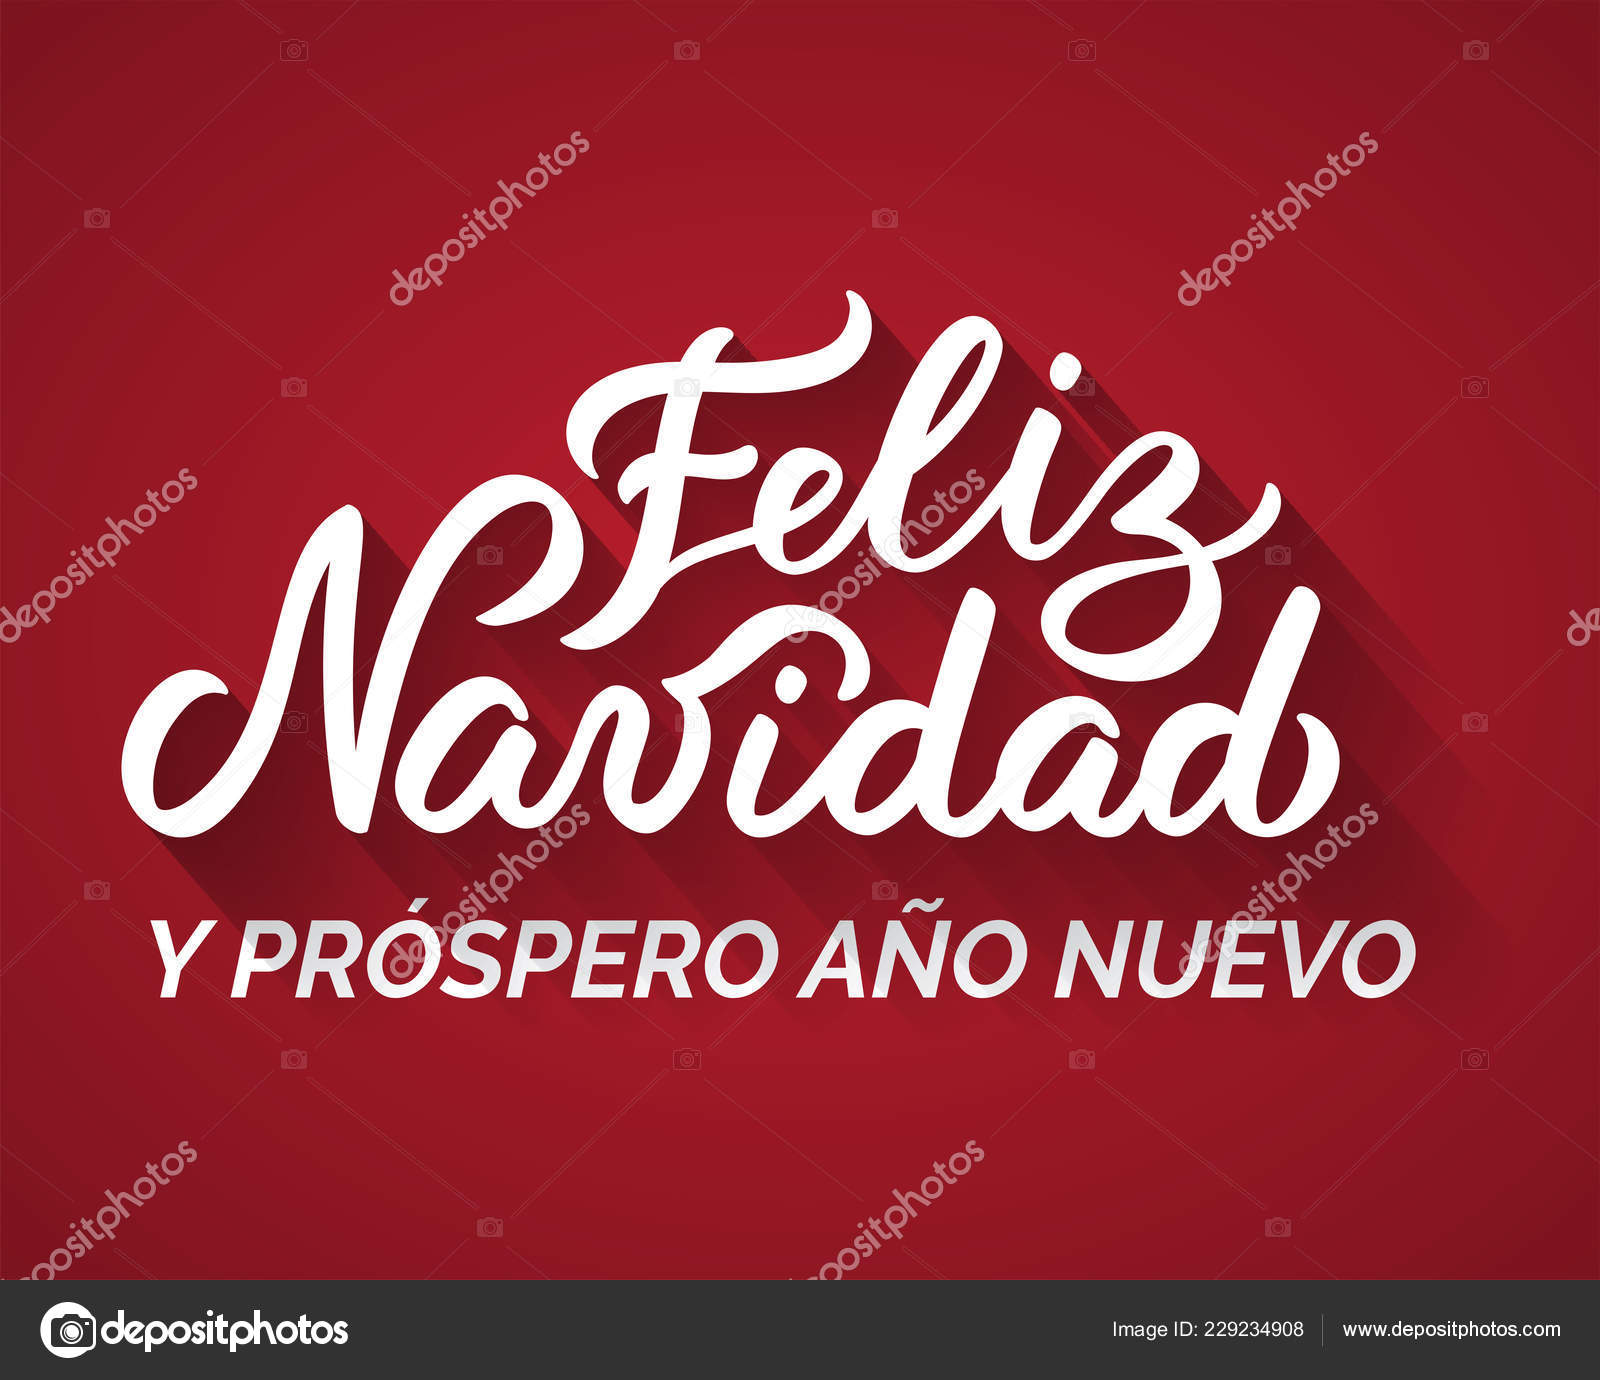 Merry Christmas And A Happy New Year From Spanish Stock Vector Image By C Oalice